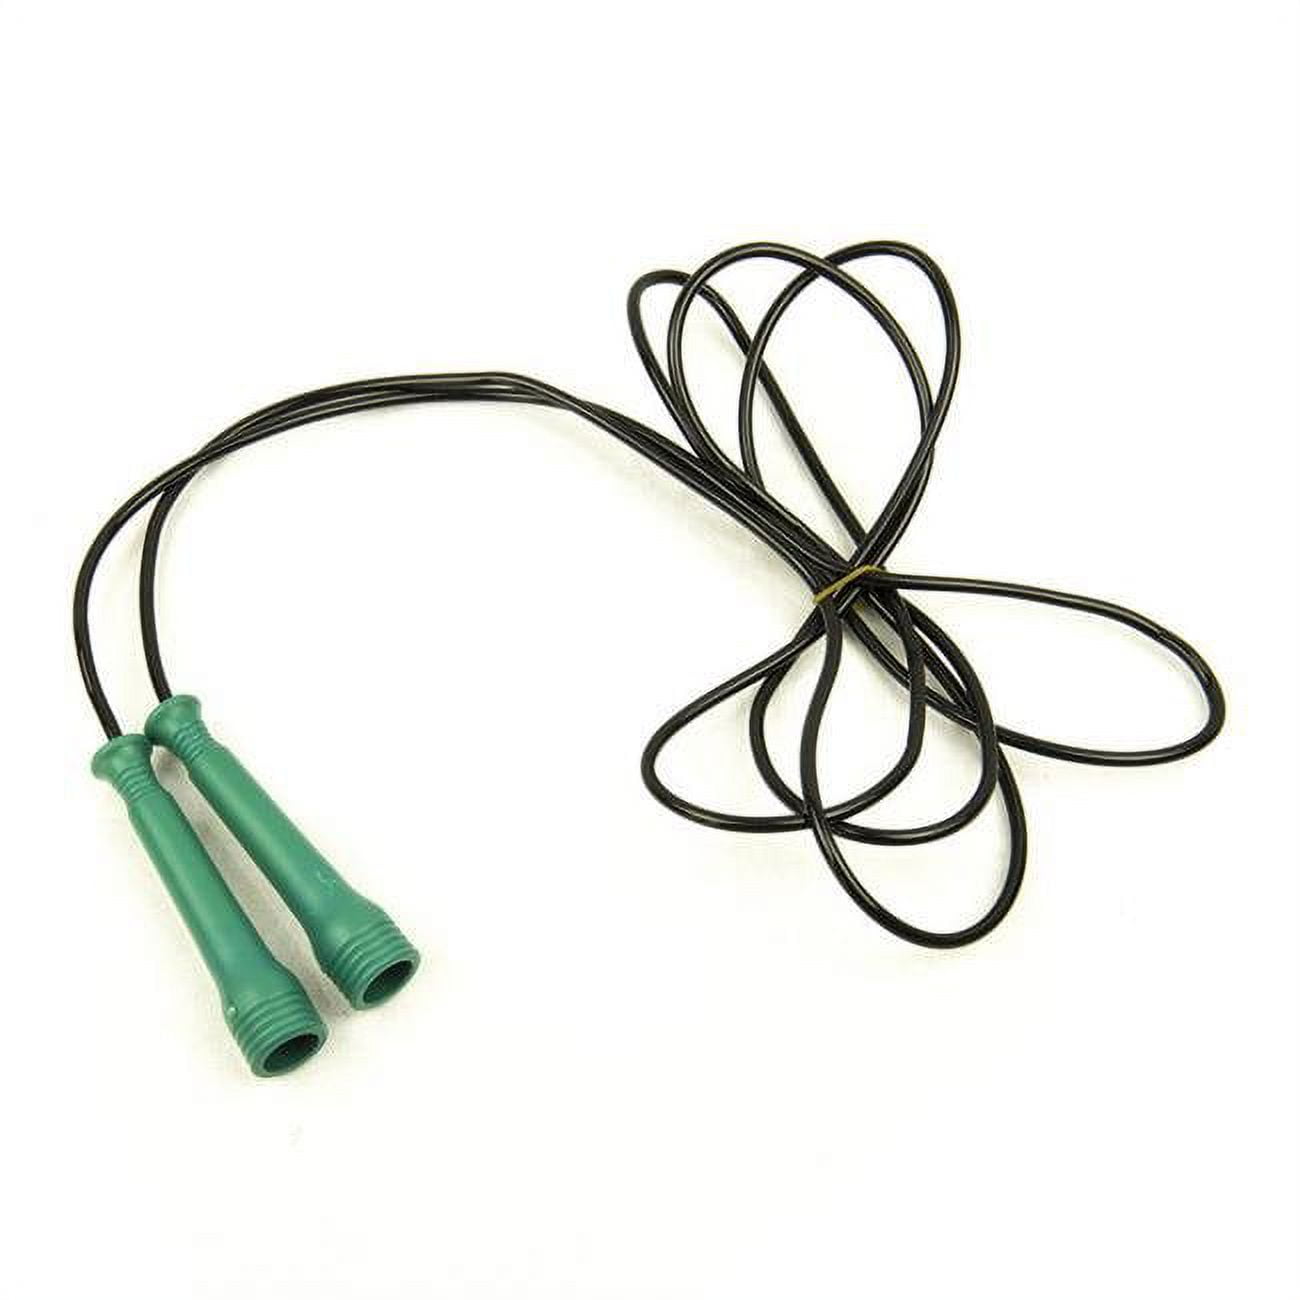 Picture of AeroMat 75016 9 ft. Adjustable Heavy Duty Speed Jump Rope, Green